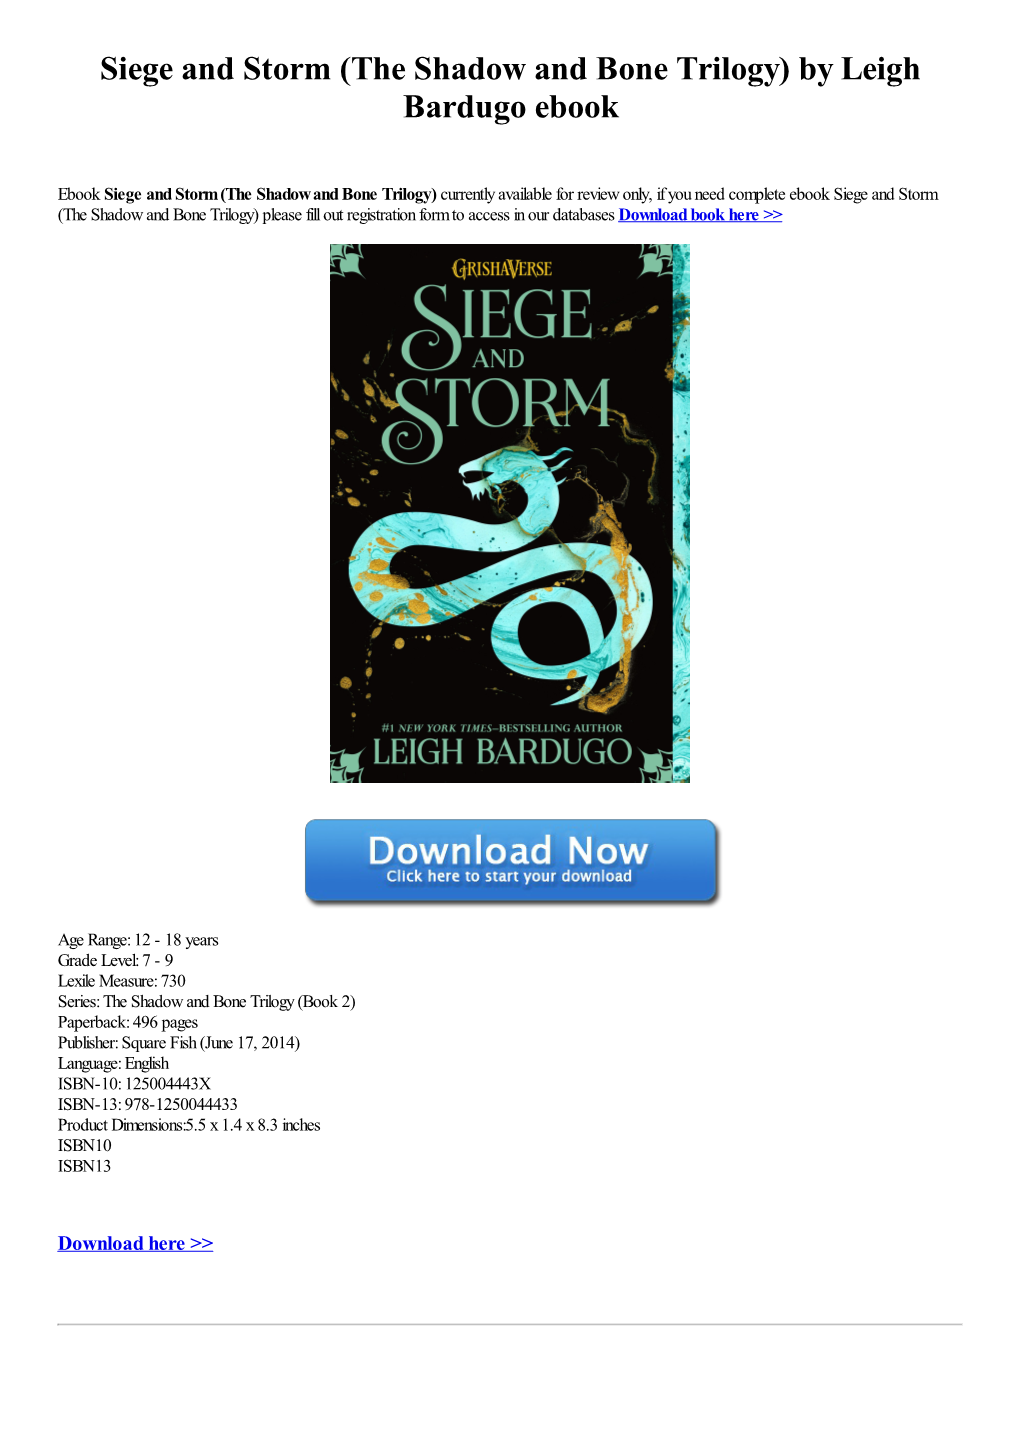 Siege and Storm (The Shadow and Bone Trilogy) by Leigh Bardugo Ebook